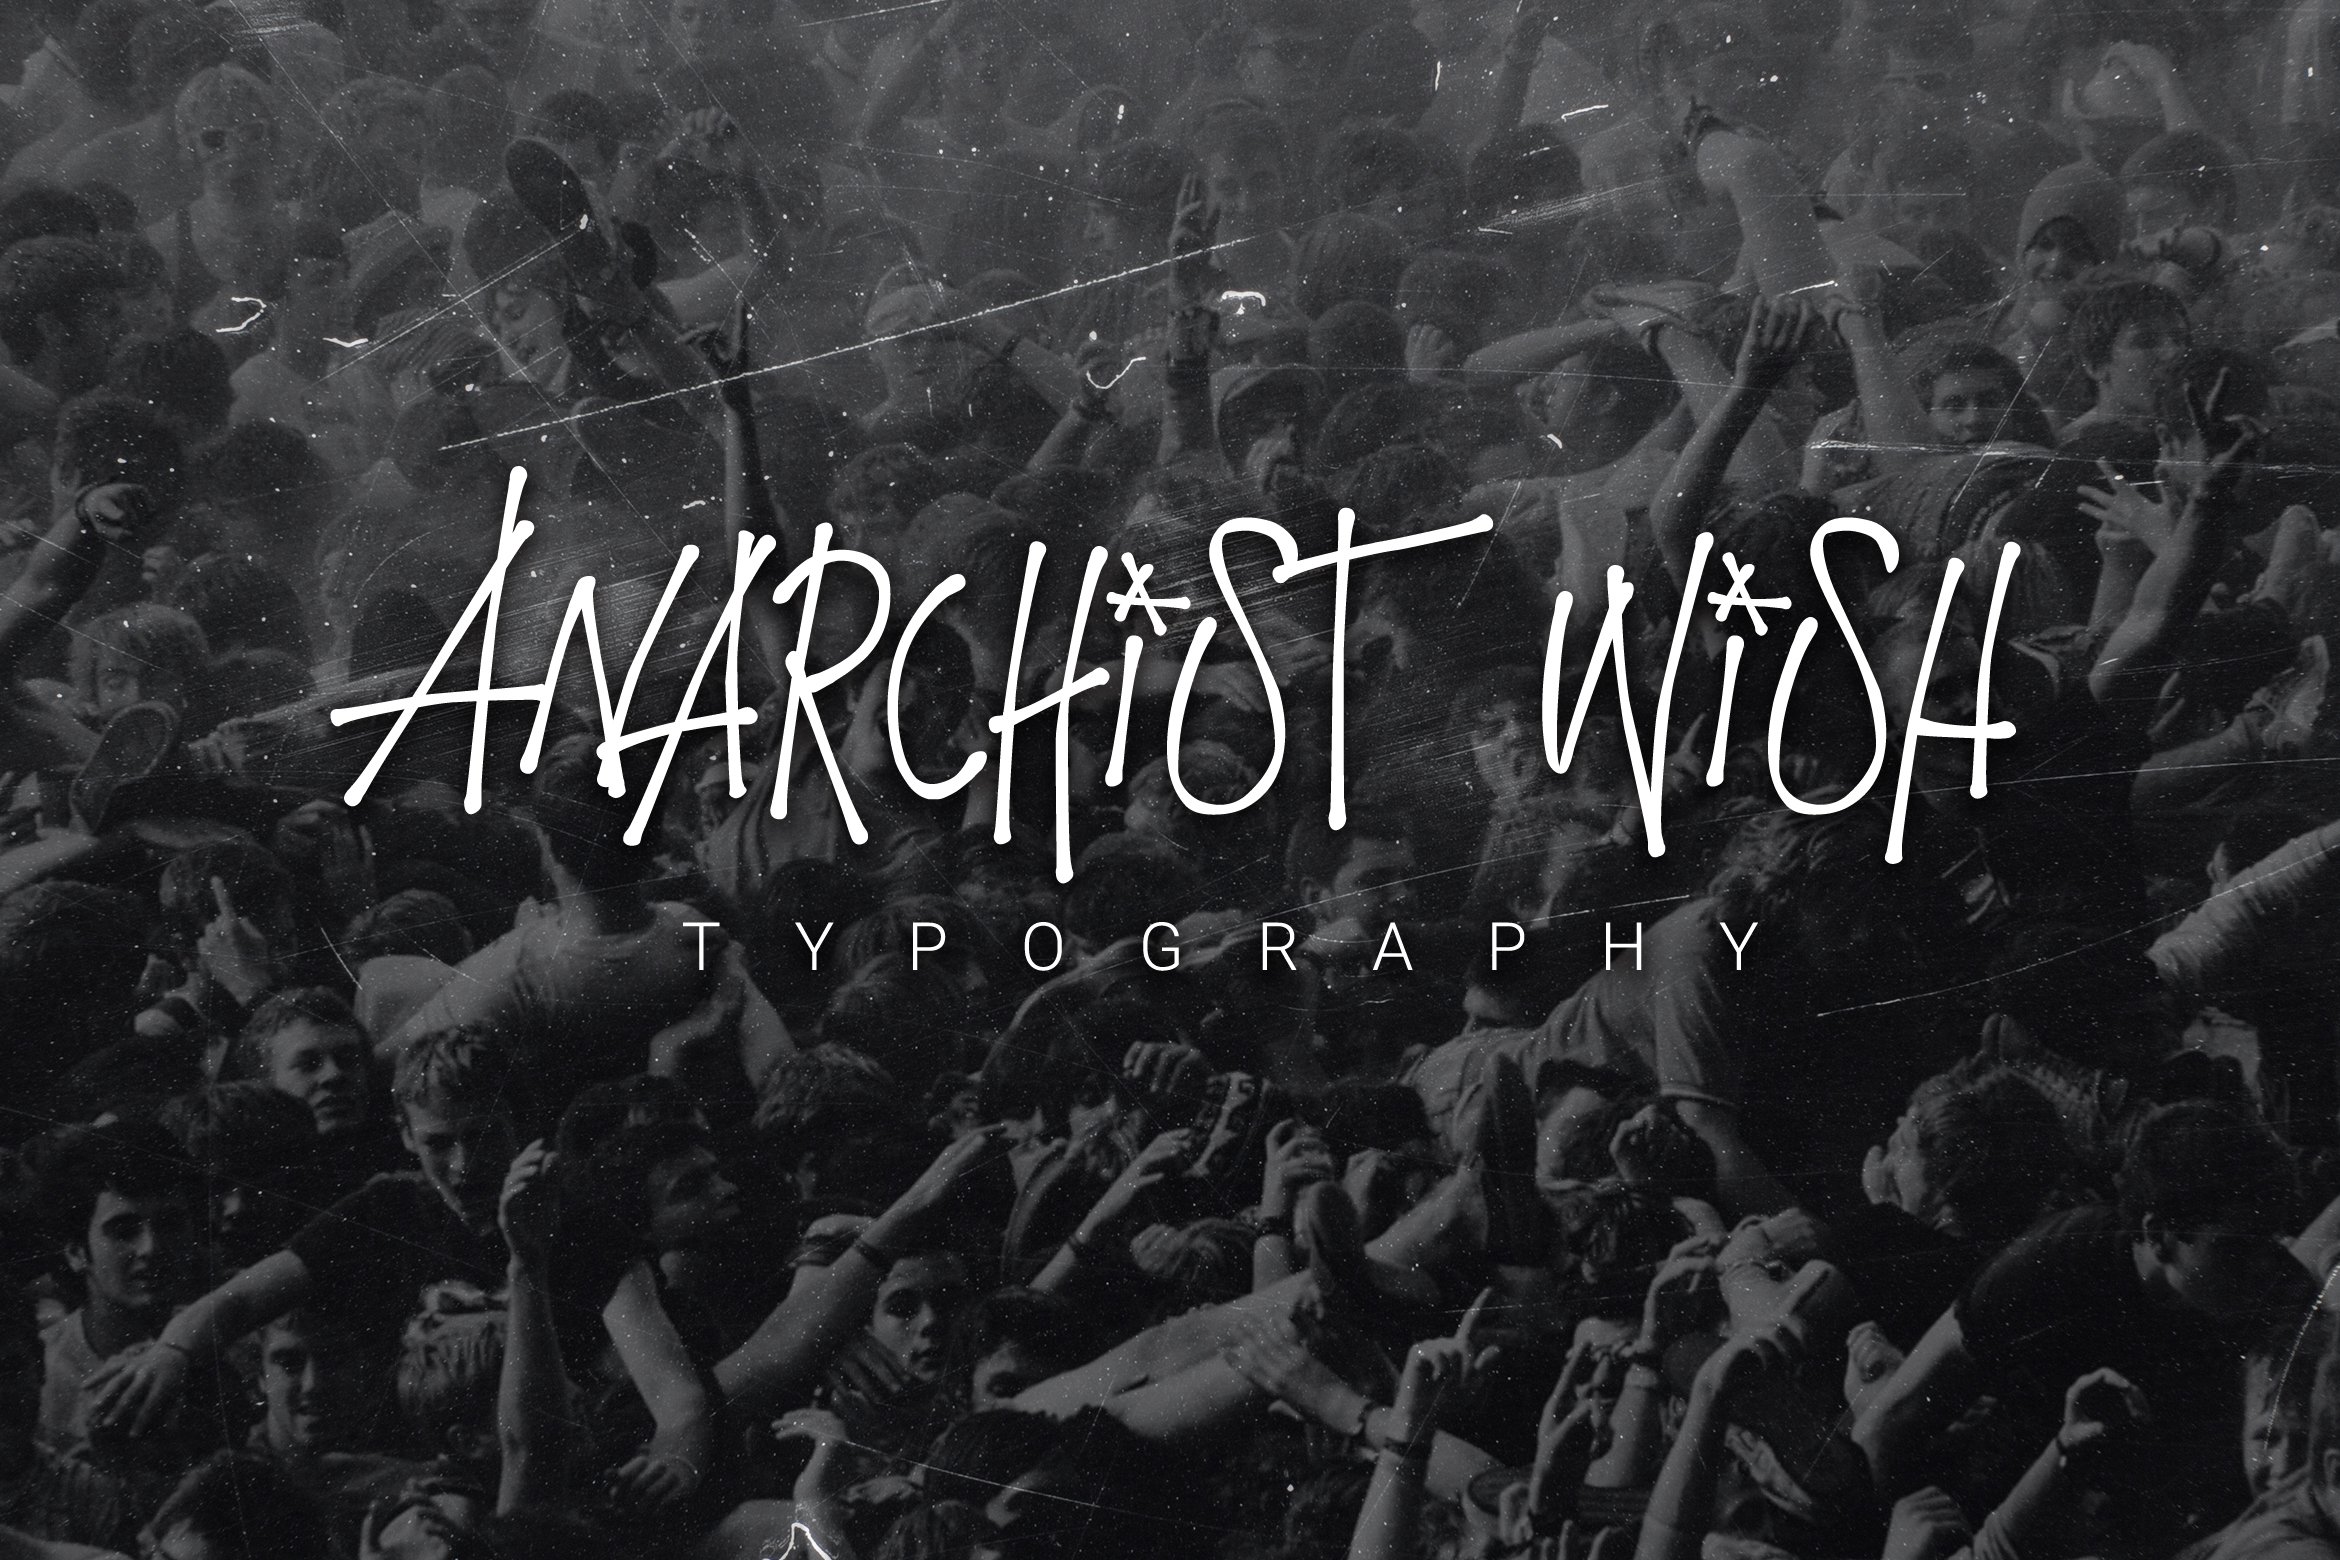 Anarchist Wish cover image.